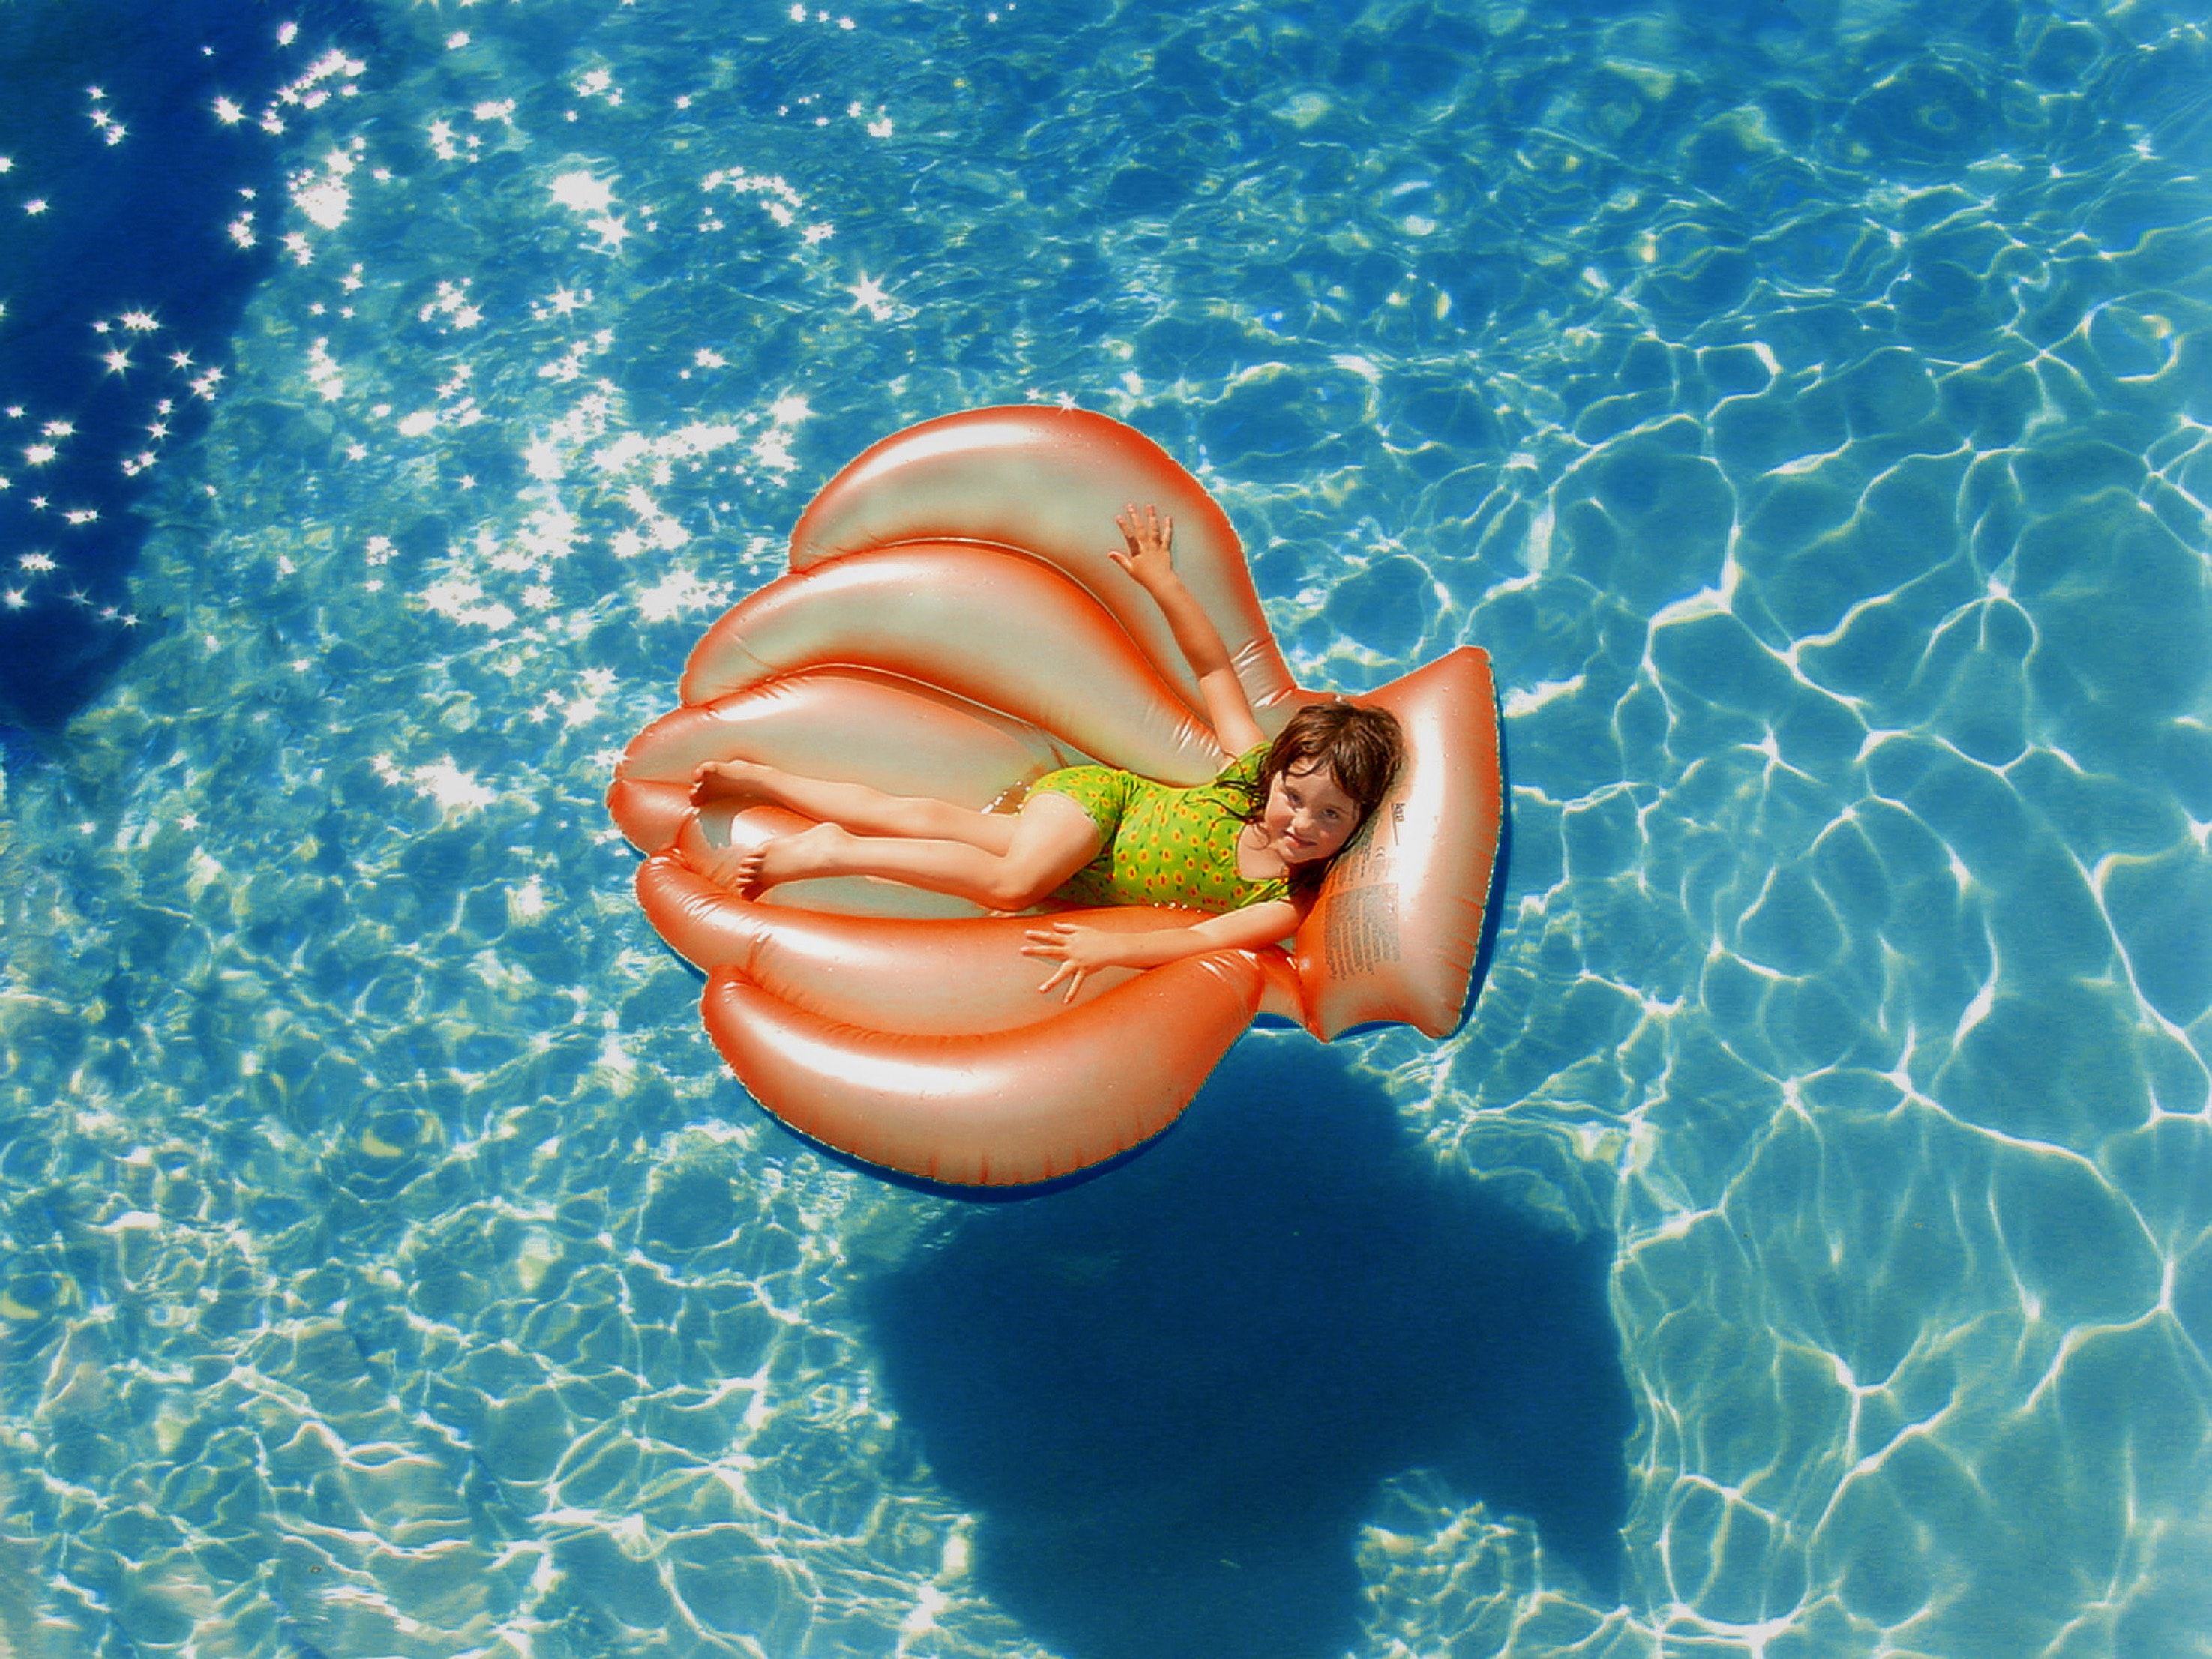 Girl wearing green wet suit riding inflatable orange life buoy on top of body of water photo